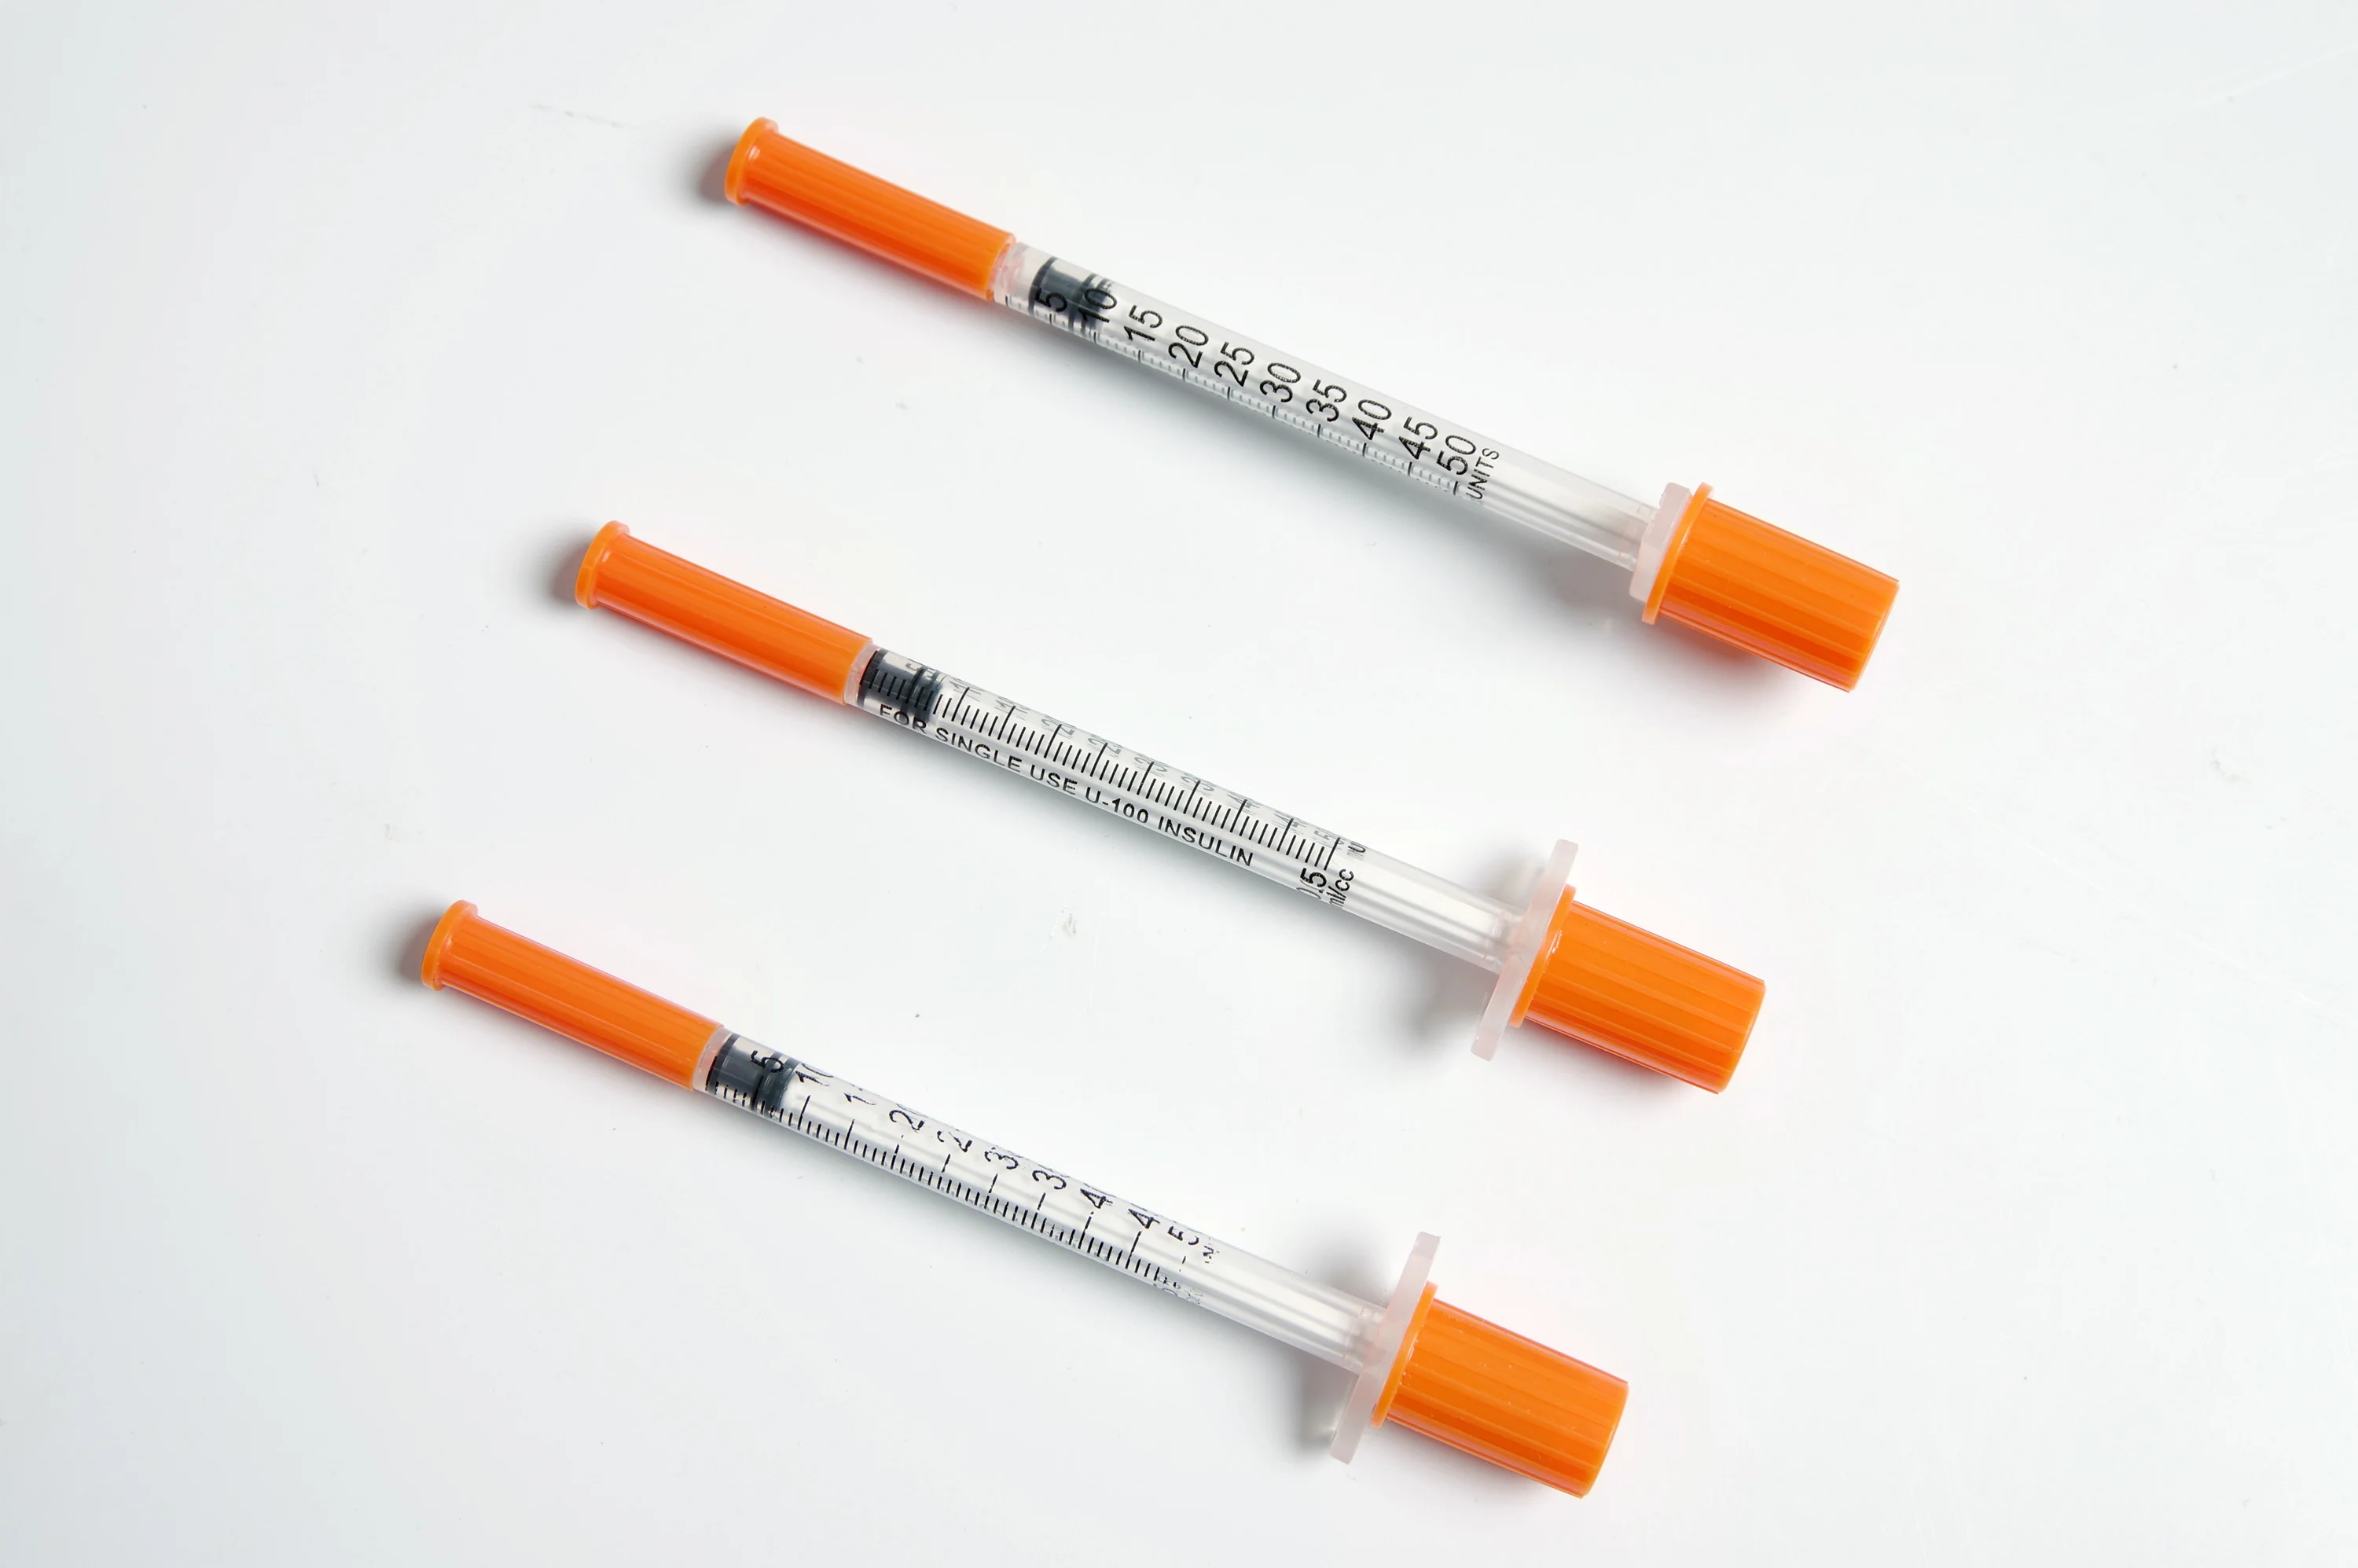 0.3ml*0.5ml*1mlDisposable Plastic Syringes Sterile Individually Packed Syringes for Farm Pets Lab Supplies